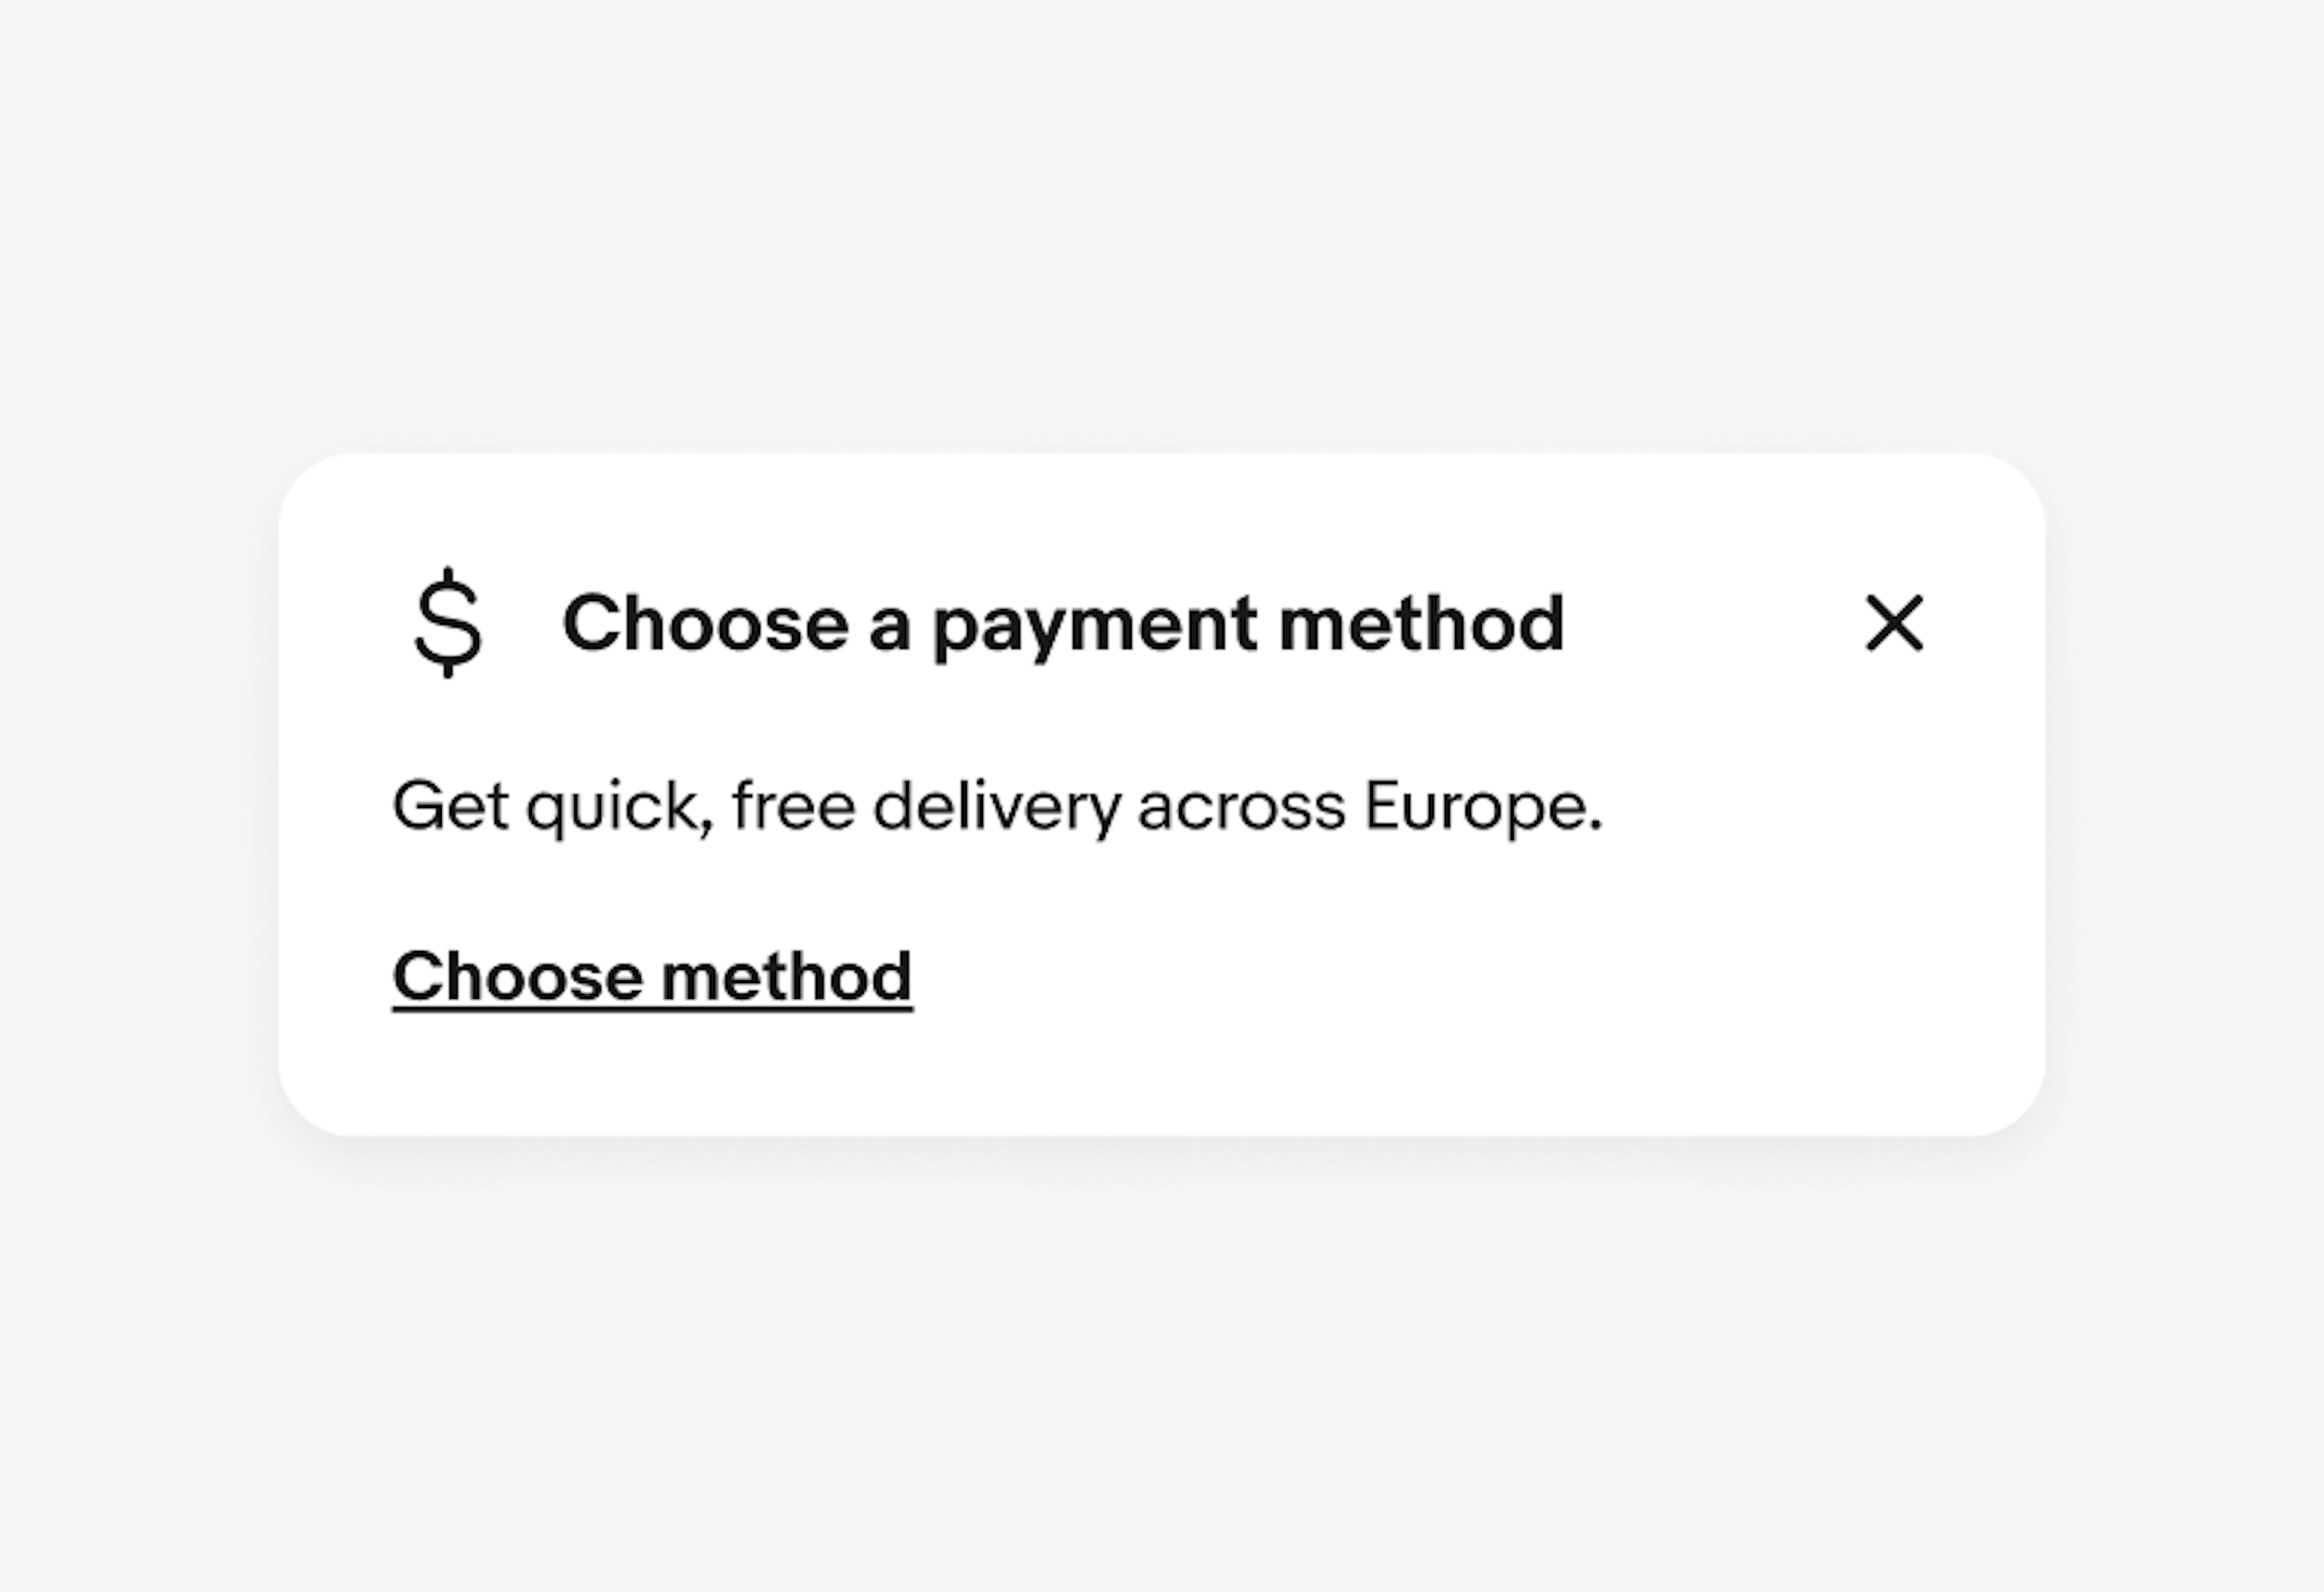 An education notice asking to choose a payment method. A dollar sign currency icon is in the upper left with the description “Get quick, free delivery across Europe” beneath.